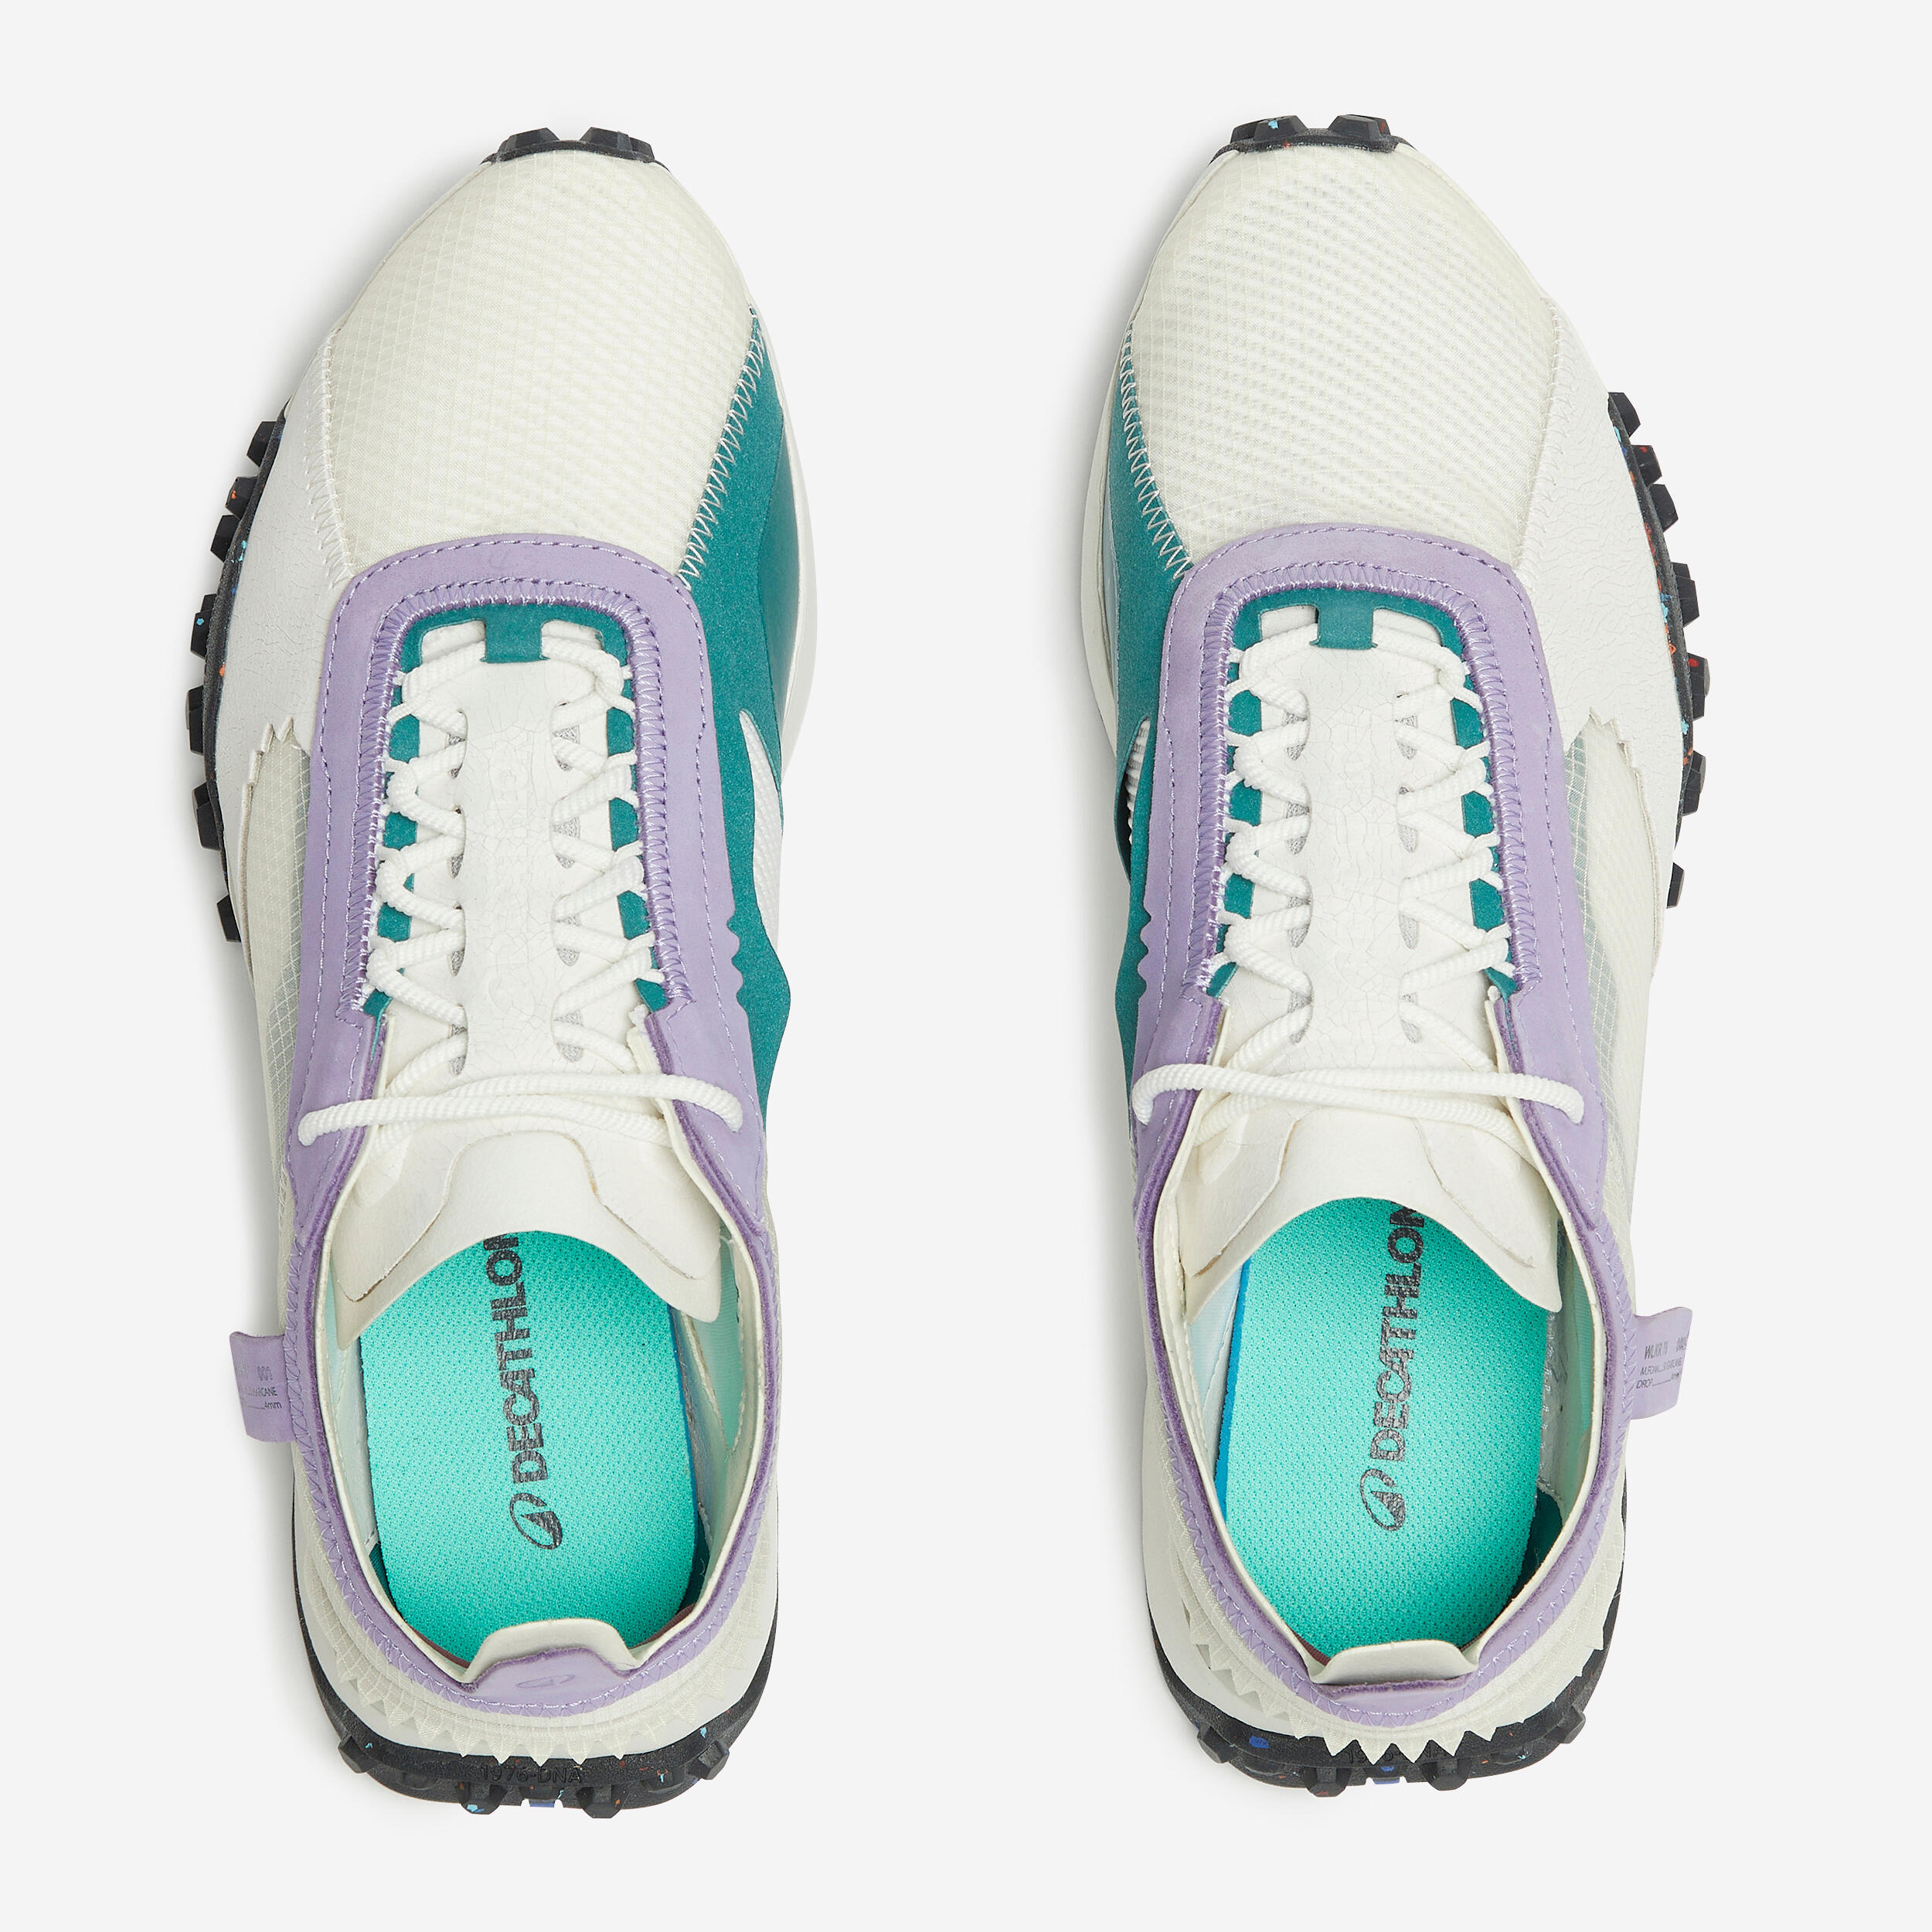 WLKR 76 Trainers-White and Purple 10/12